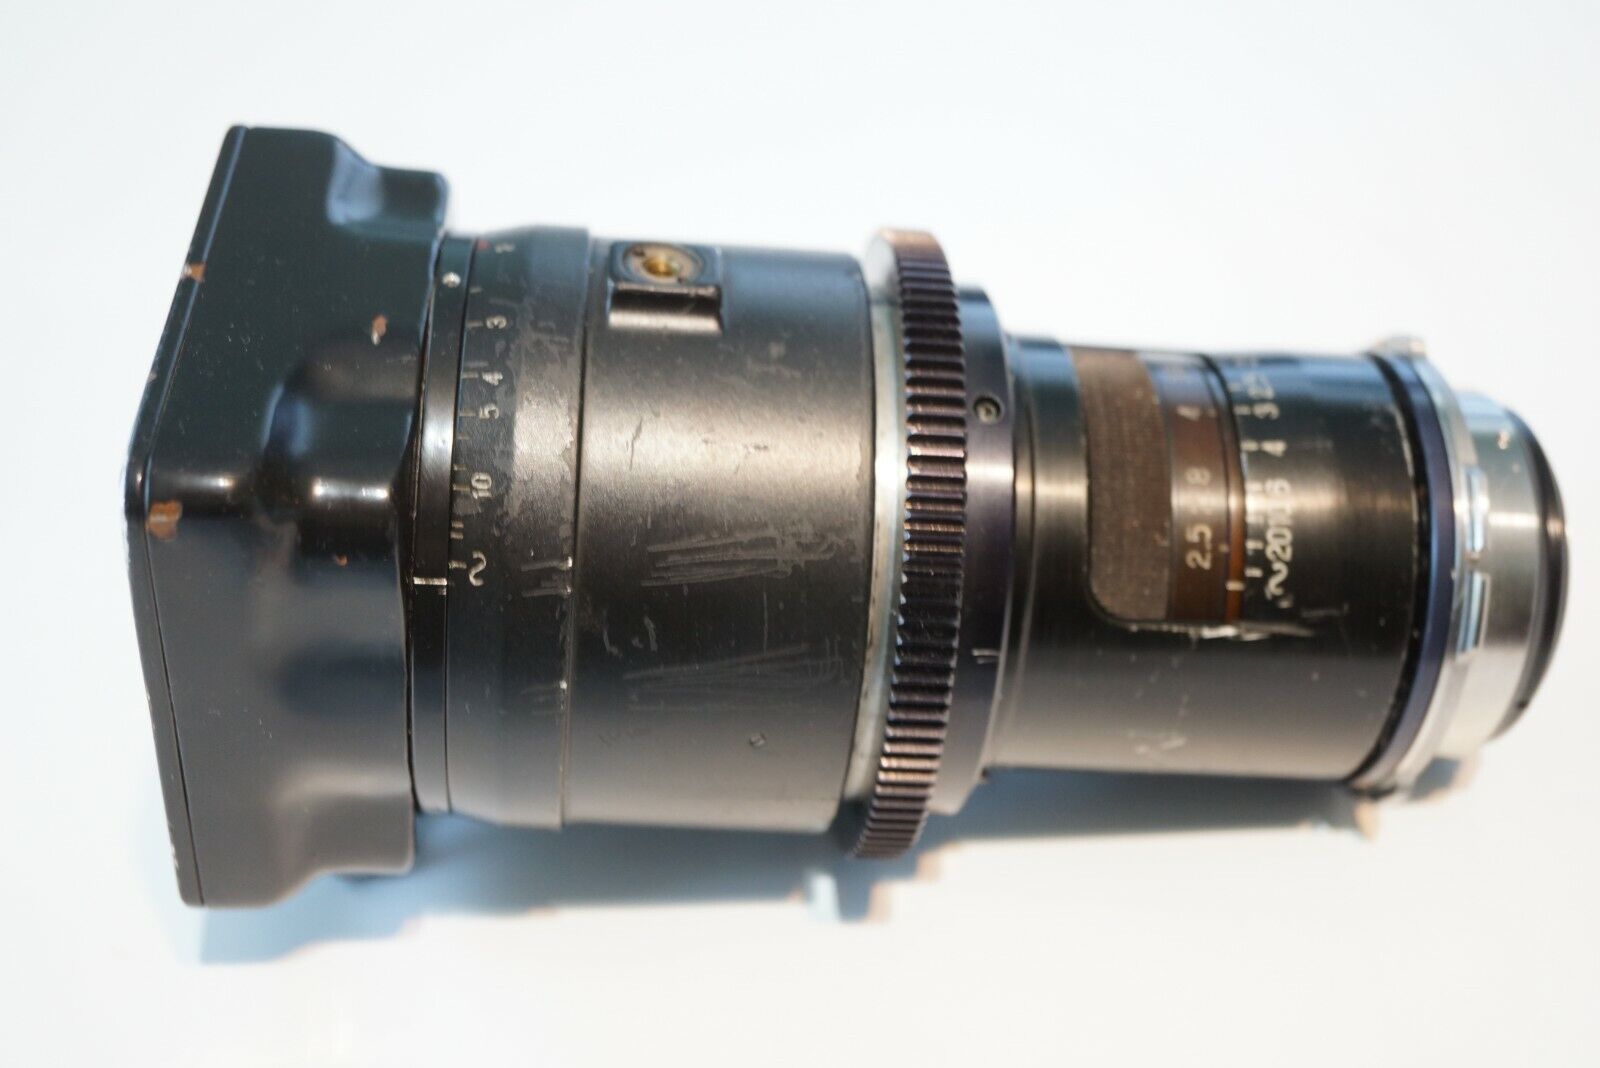 Anamorphic lens NAC4-1 75mm / 2 (T-2.5), LOOMP with PL mount.